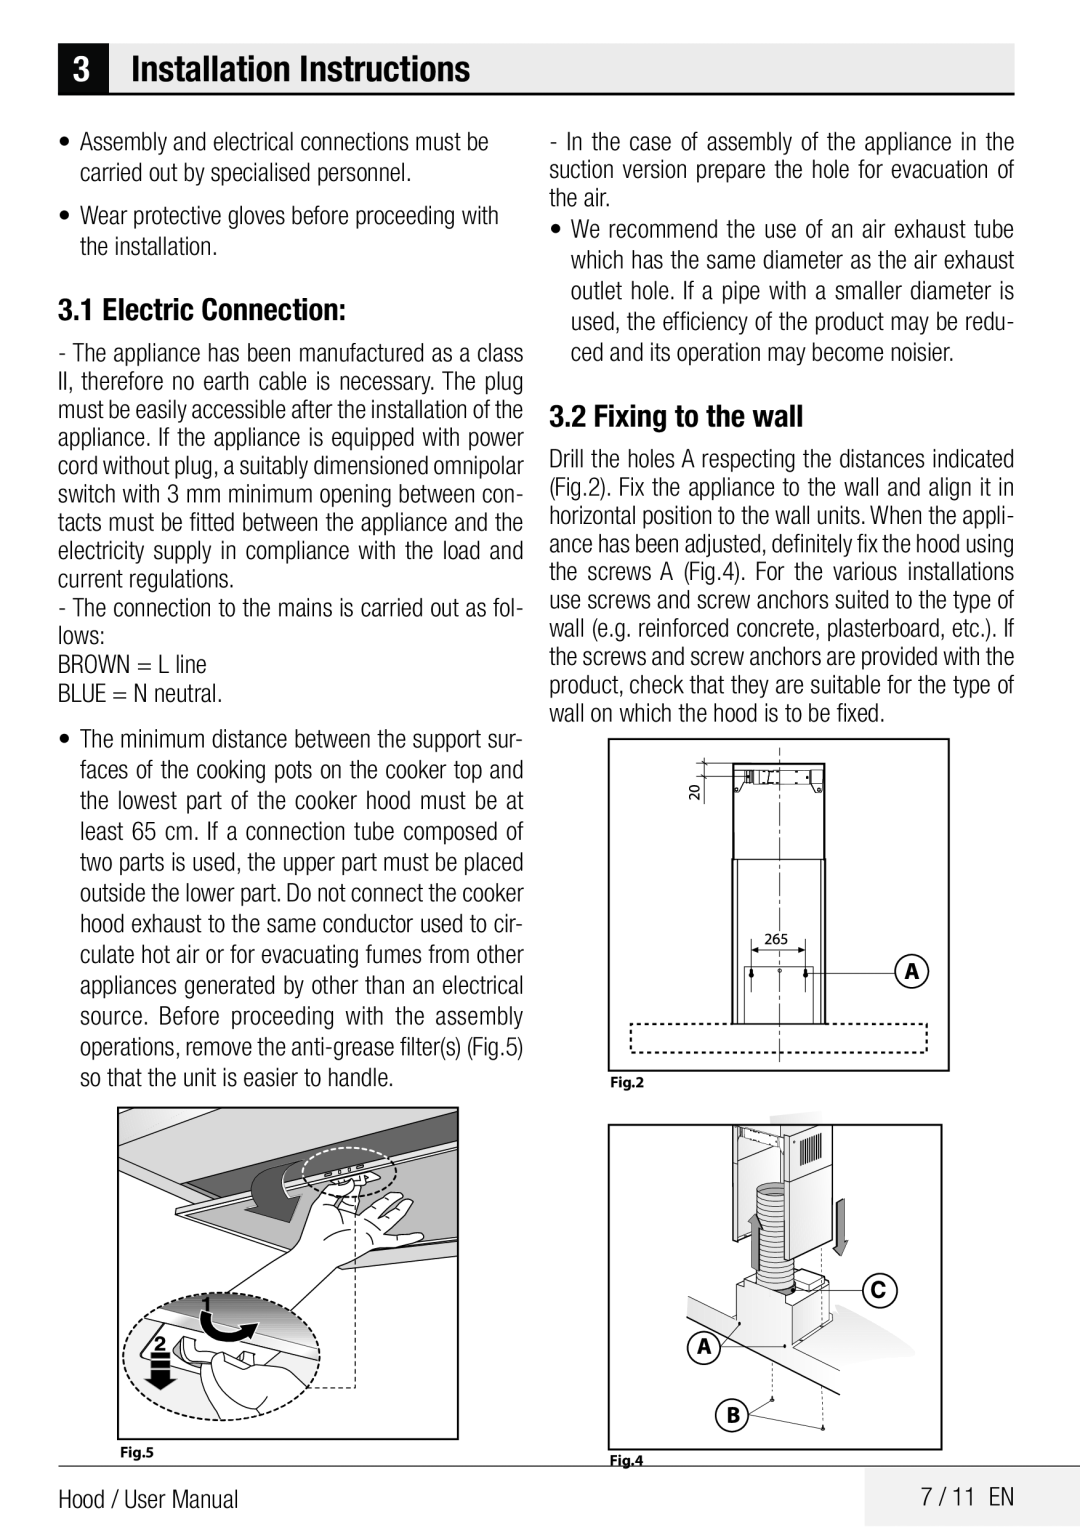 Beko CWB6403X, CWB9403X manual 3Installation Instructions, Electric Connection, Fixing to the wall 